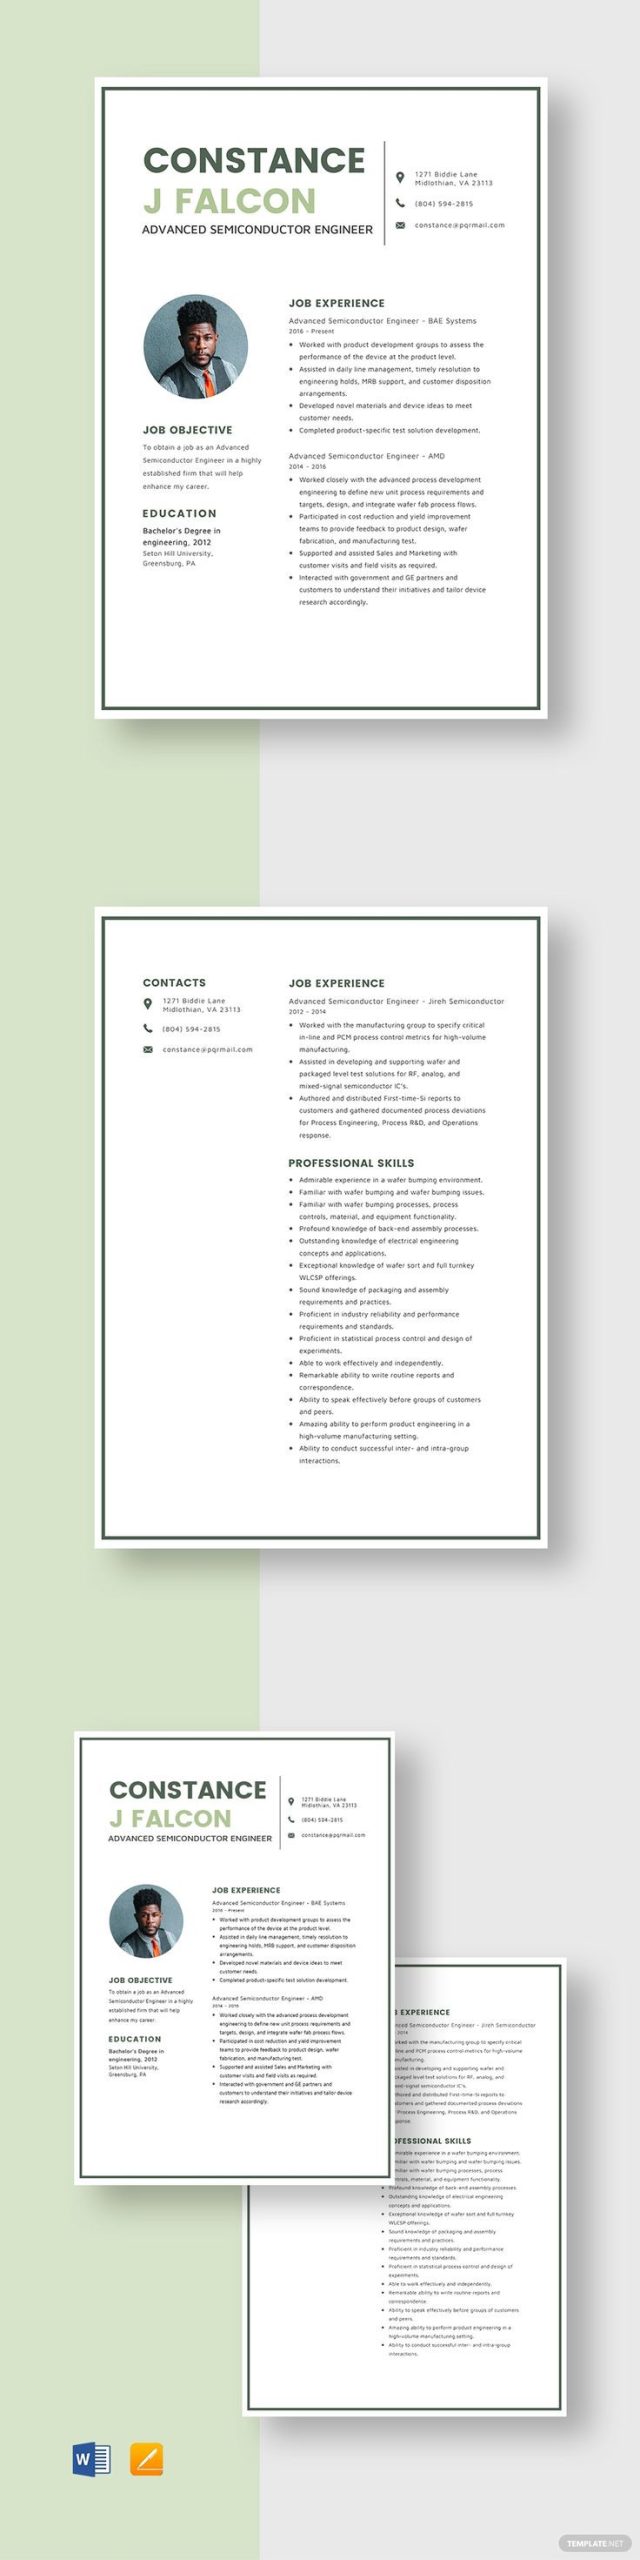 Sample Resume for Semiconductor Field Engineer Free Free Advanced Semiconductor Engineer Resume Template – Word …